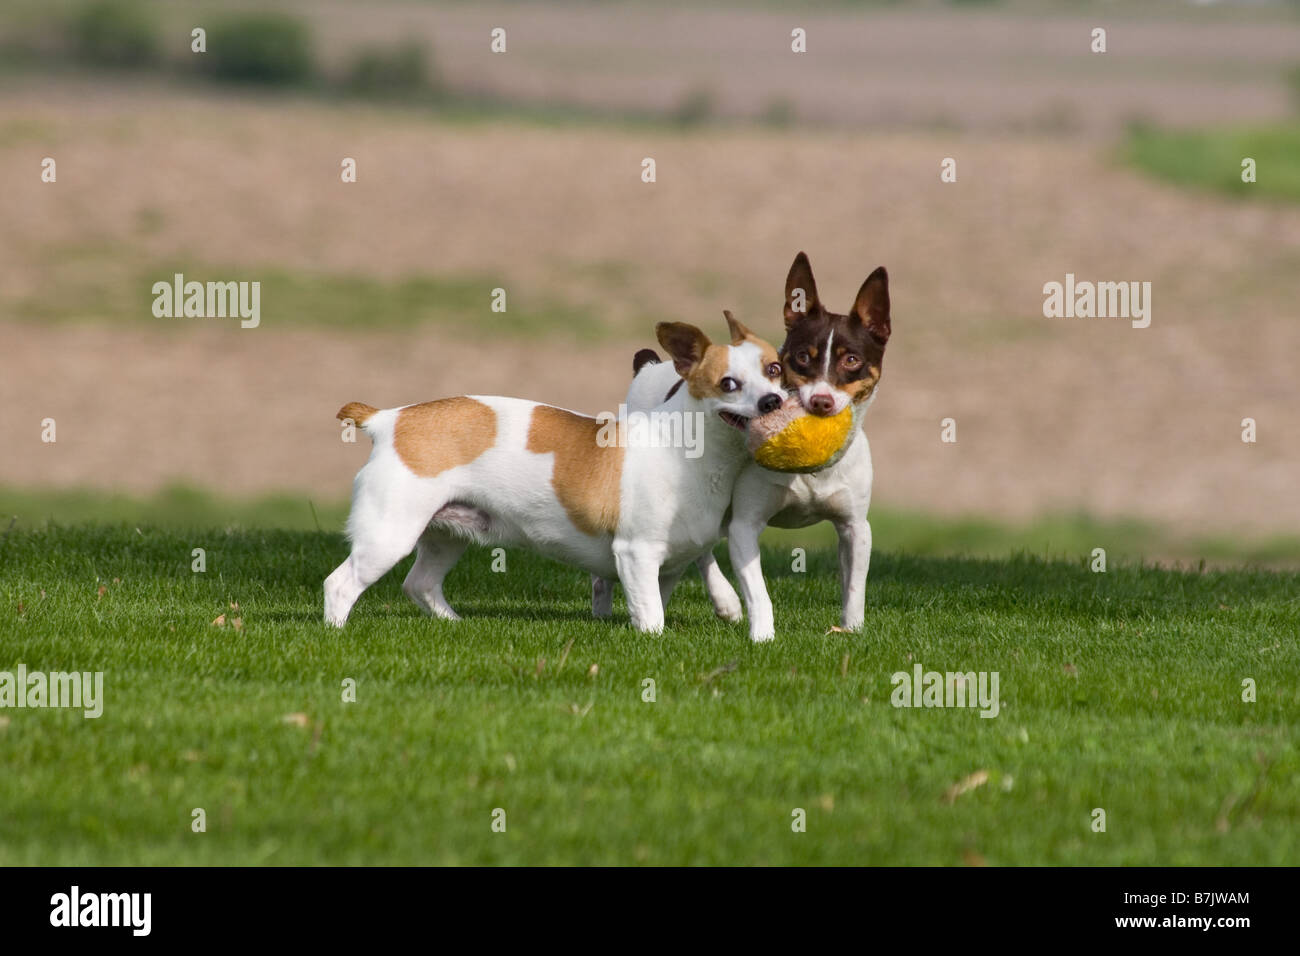 dogs playing together with a fluffy soft toy Stock Photo